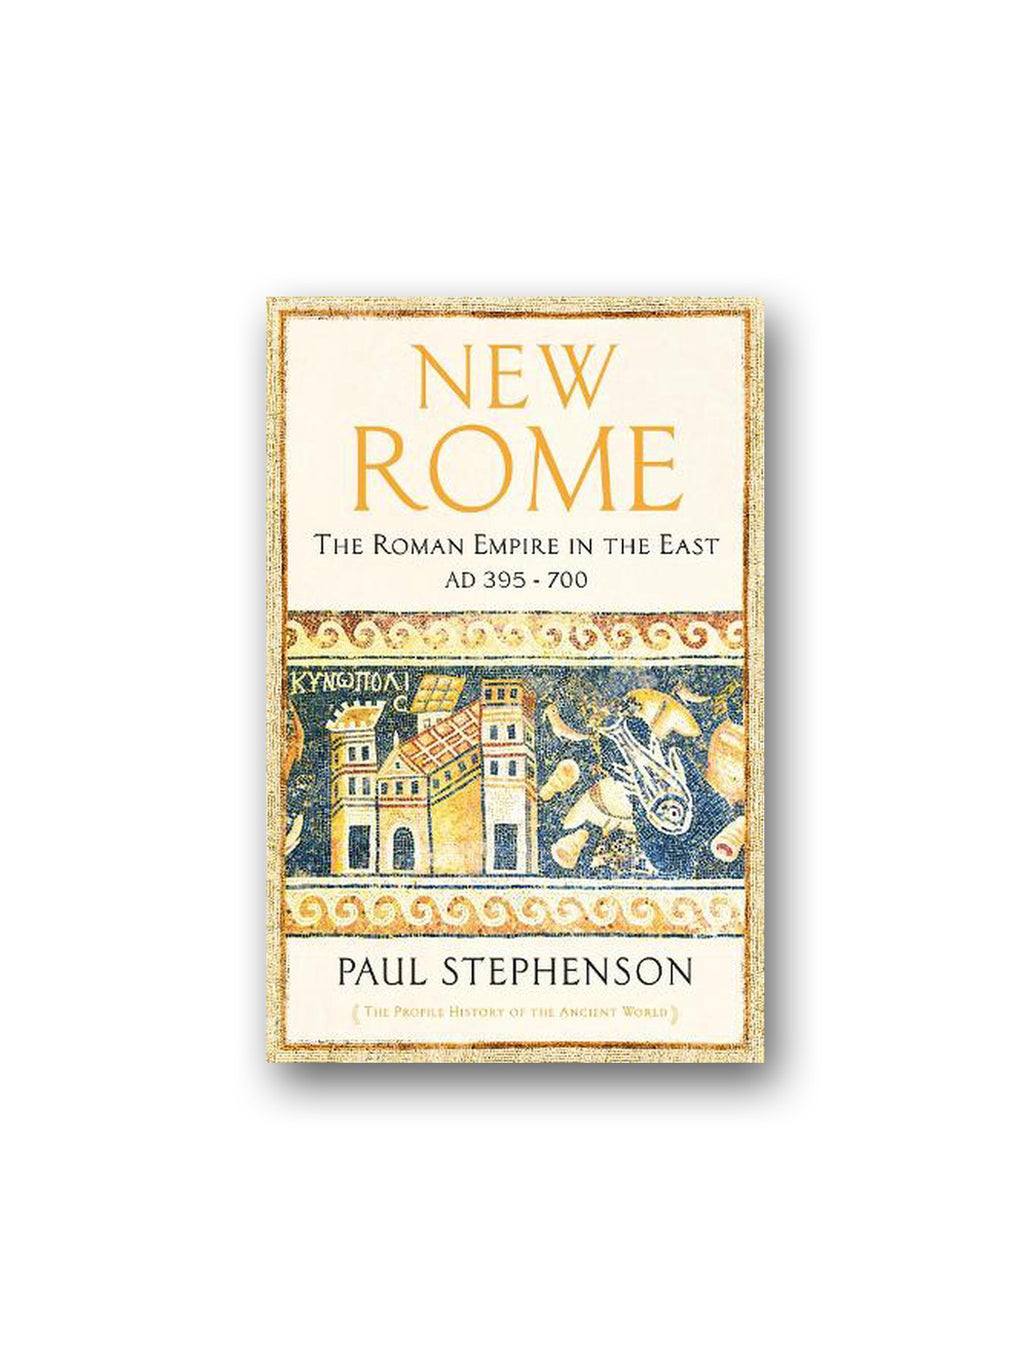 New Rome : The Roman Empire in the East, AD 395 - 700